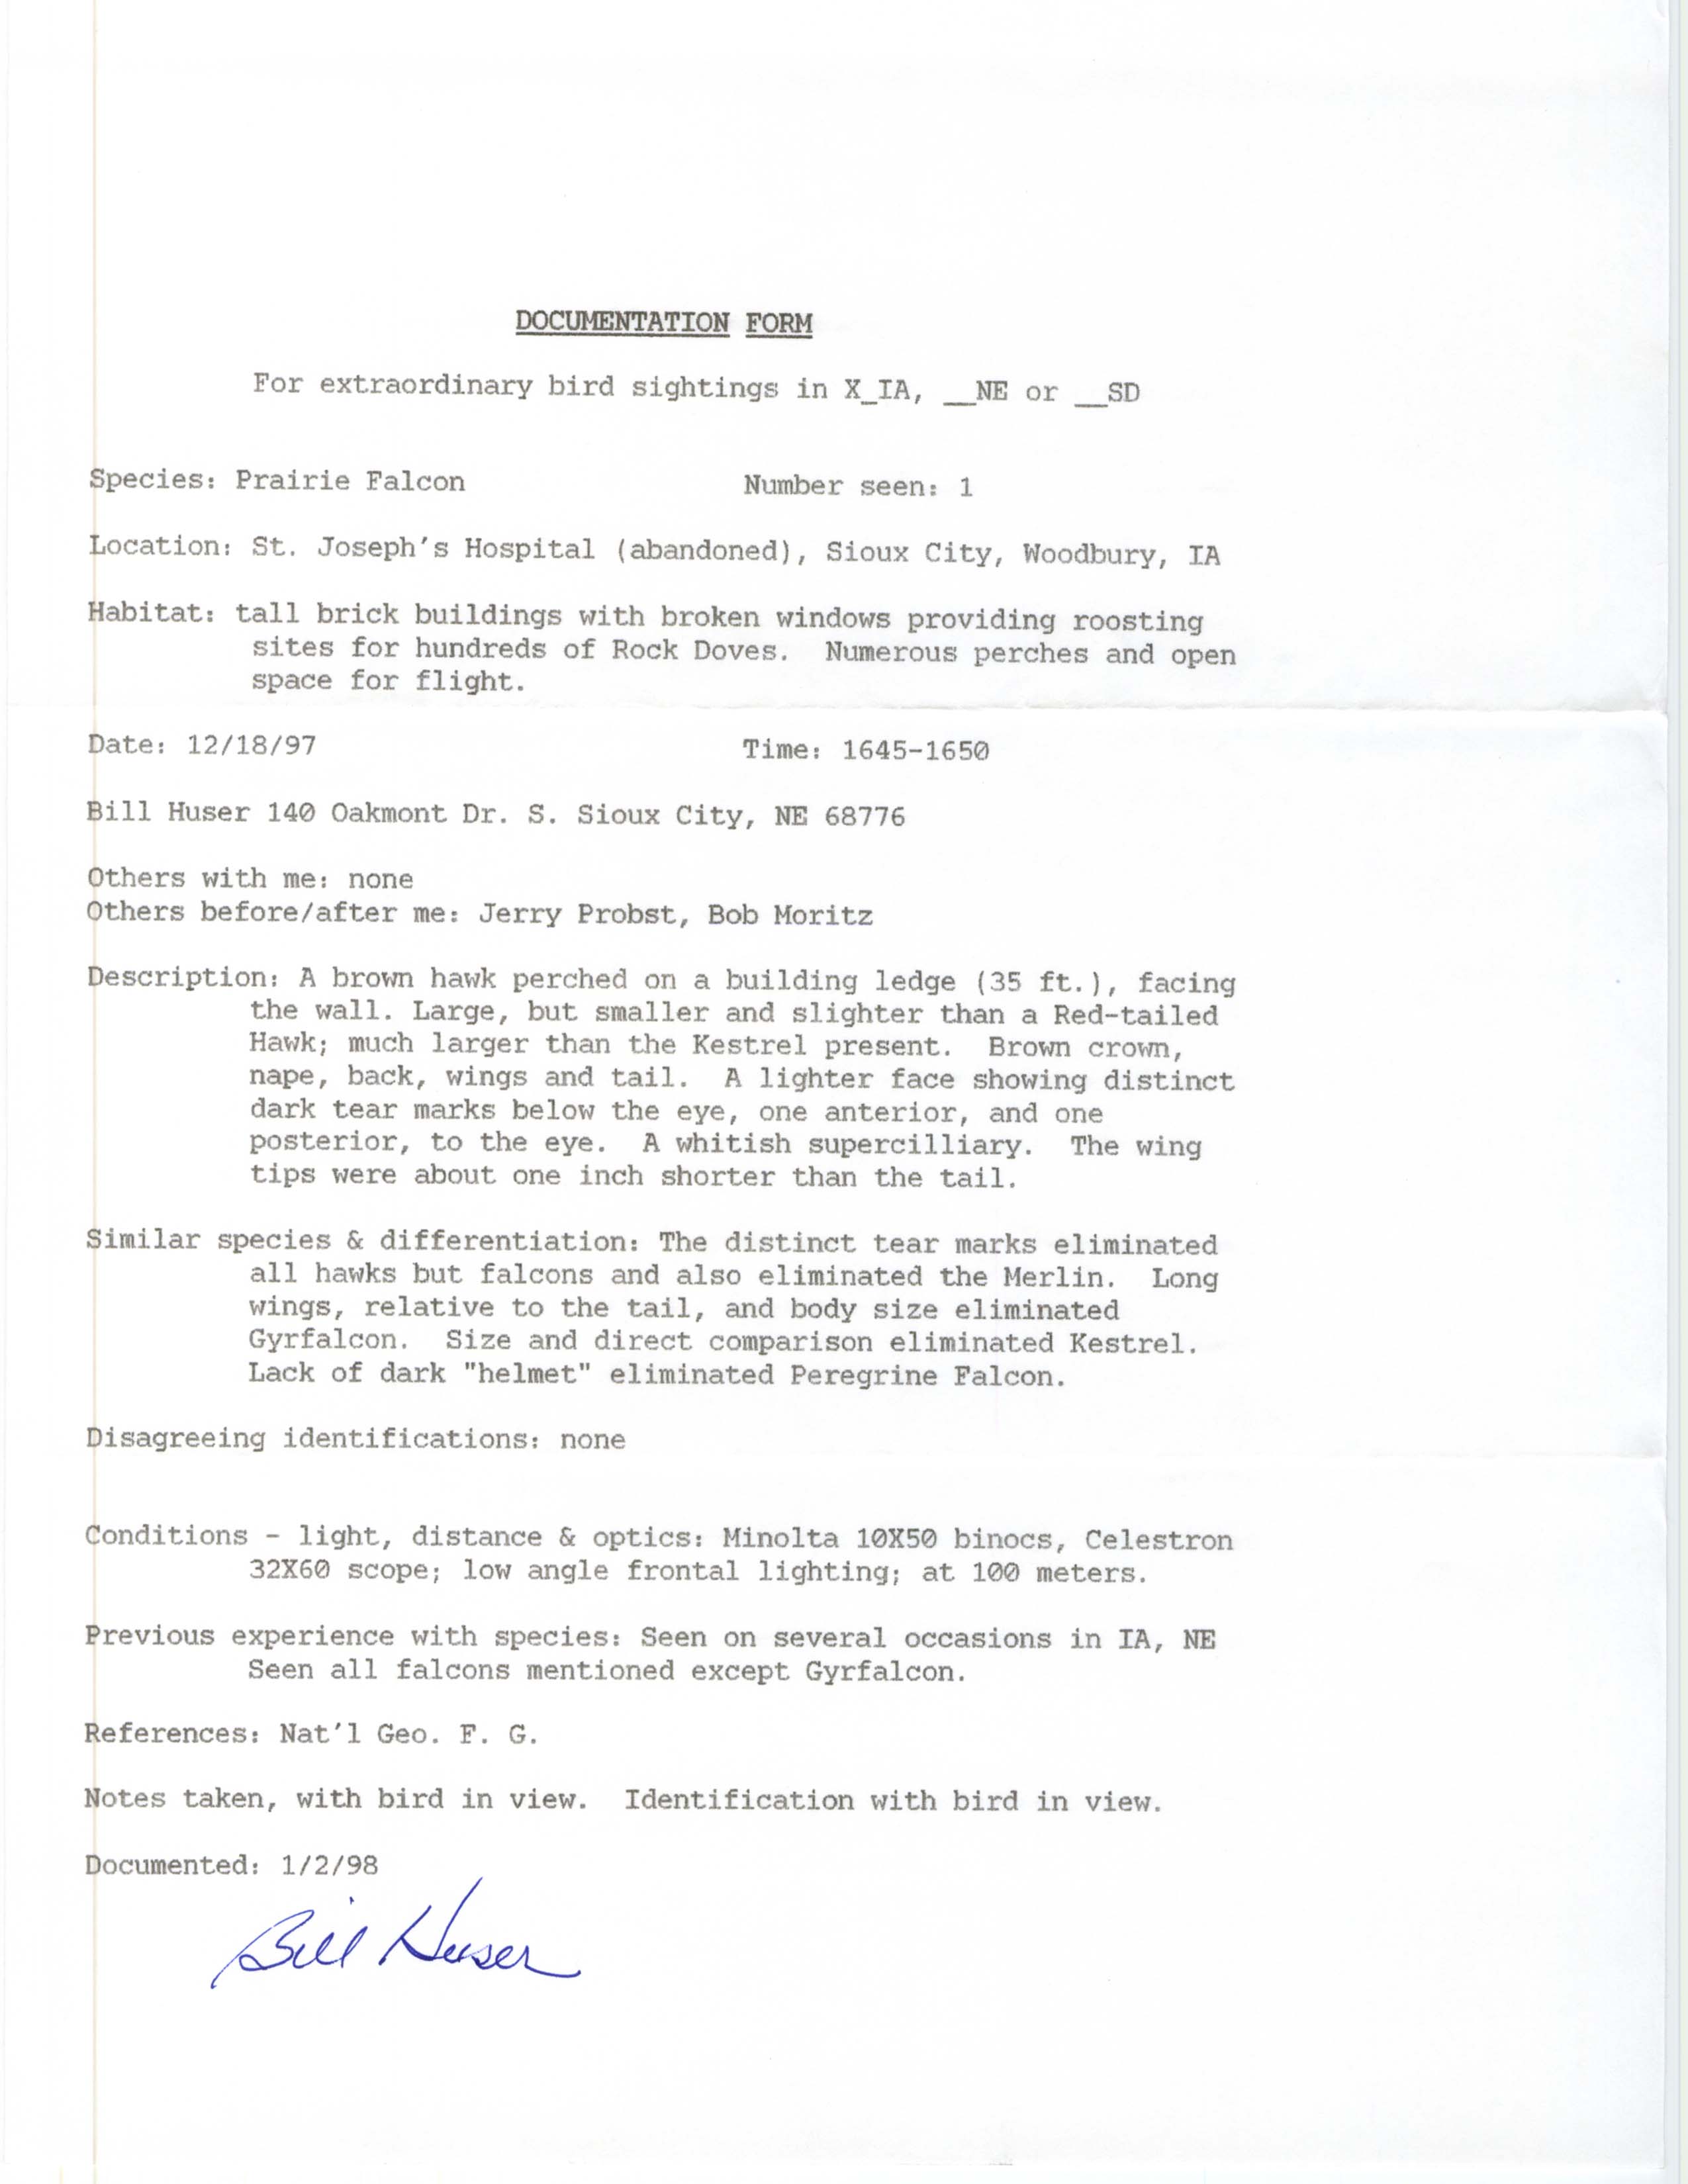 Rare bird documentation form for Prairie Falcon at St. Joseph's Hospital (abandoned) in Sioux City, 1997